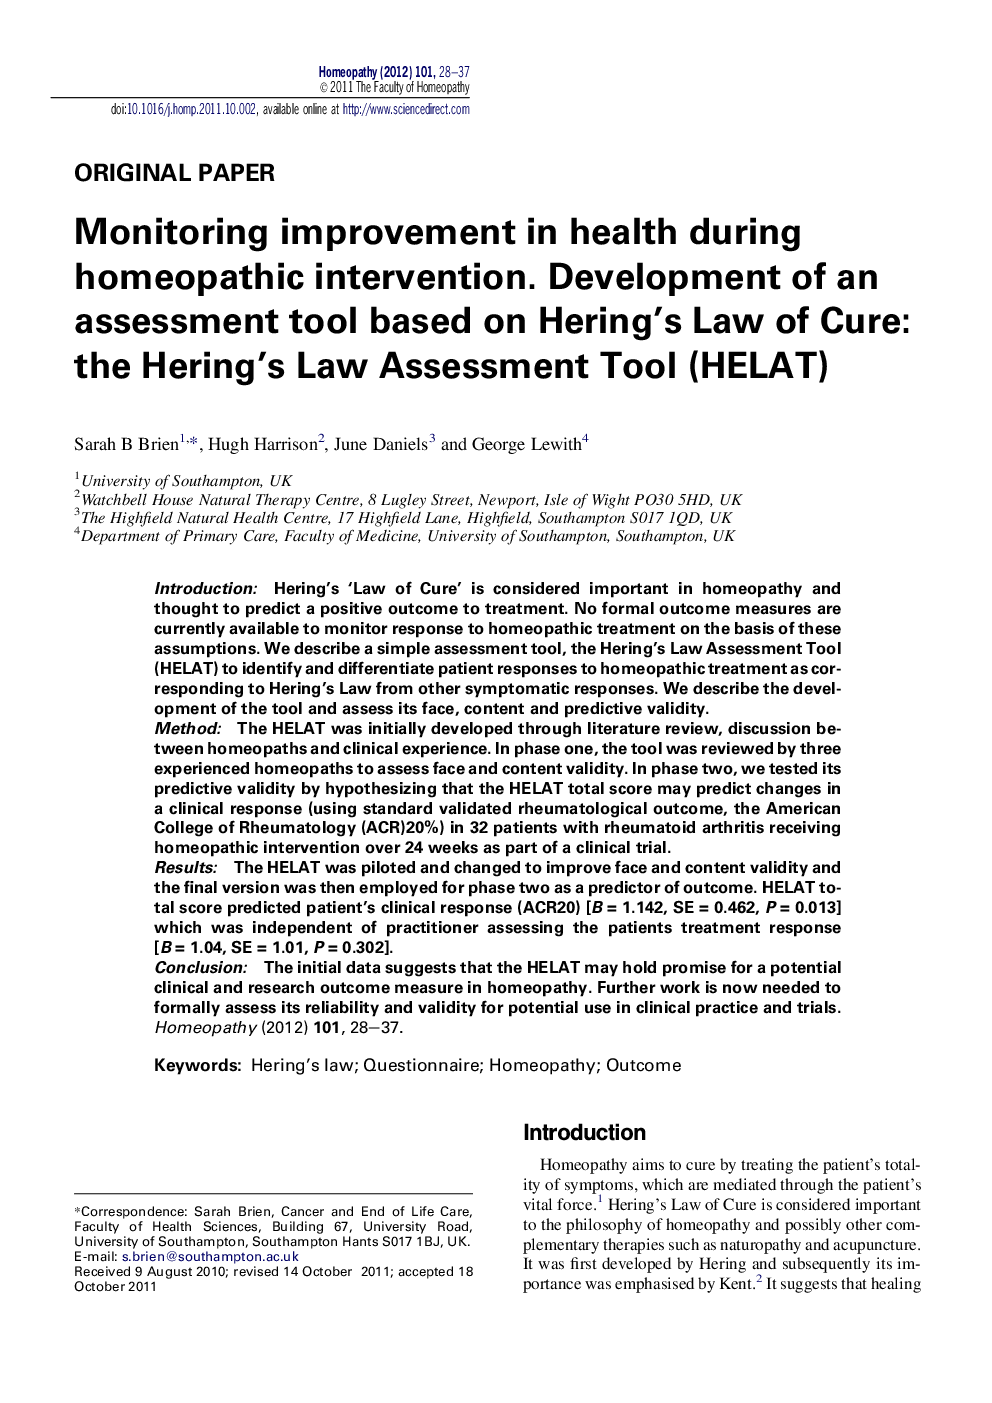 Monitoring improvement in health during homeopathic intervention. Development of an assessment tool based on Hering’s Law of Cure: the Hering’s Law Assessment Tool (HELAT)